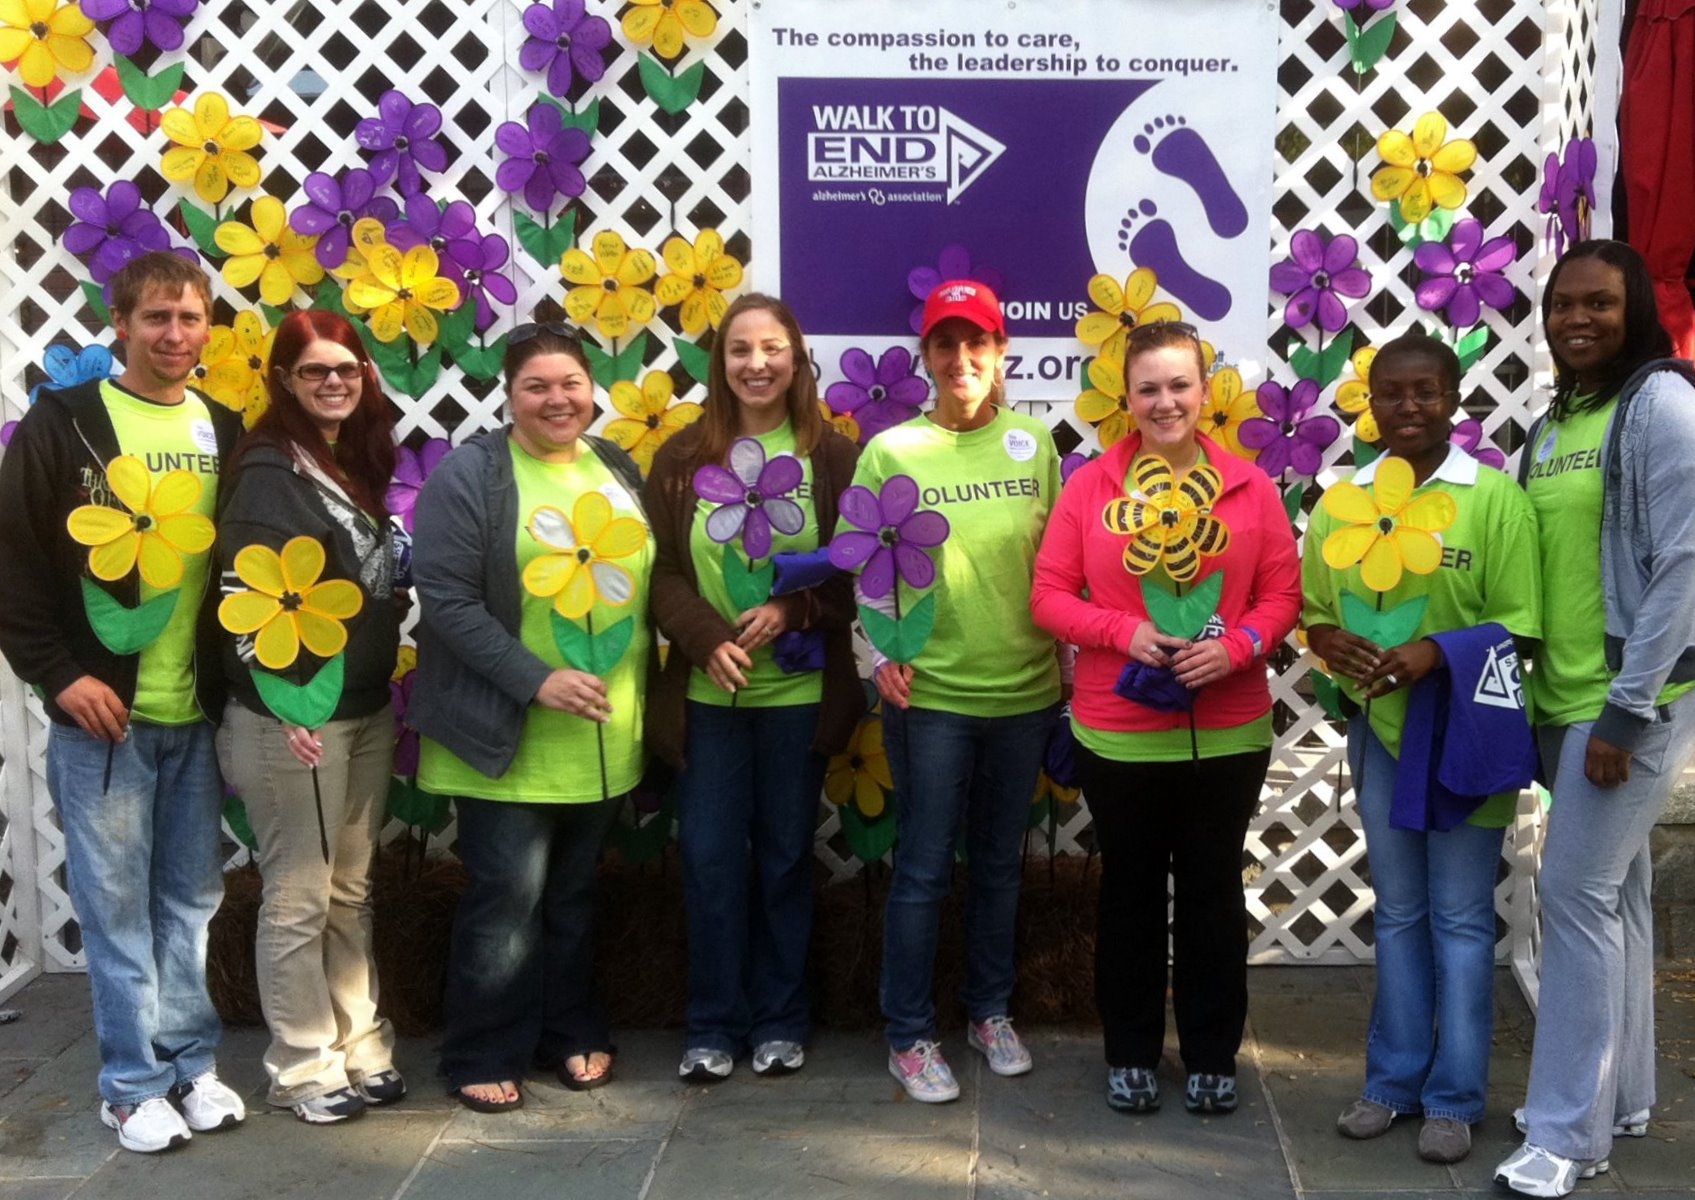 GoldMax is proud to volunteer annually for the Walk to End Alzheimer’s in addition to the other charitable organizations we are so proud to be a part of.  